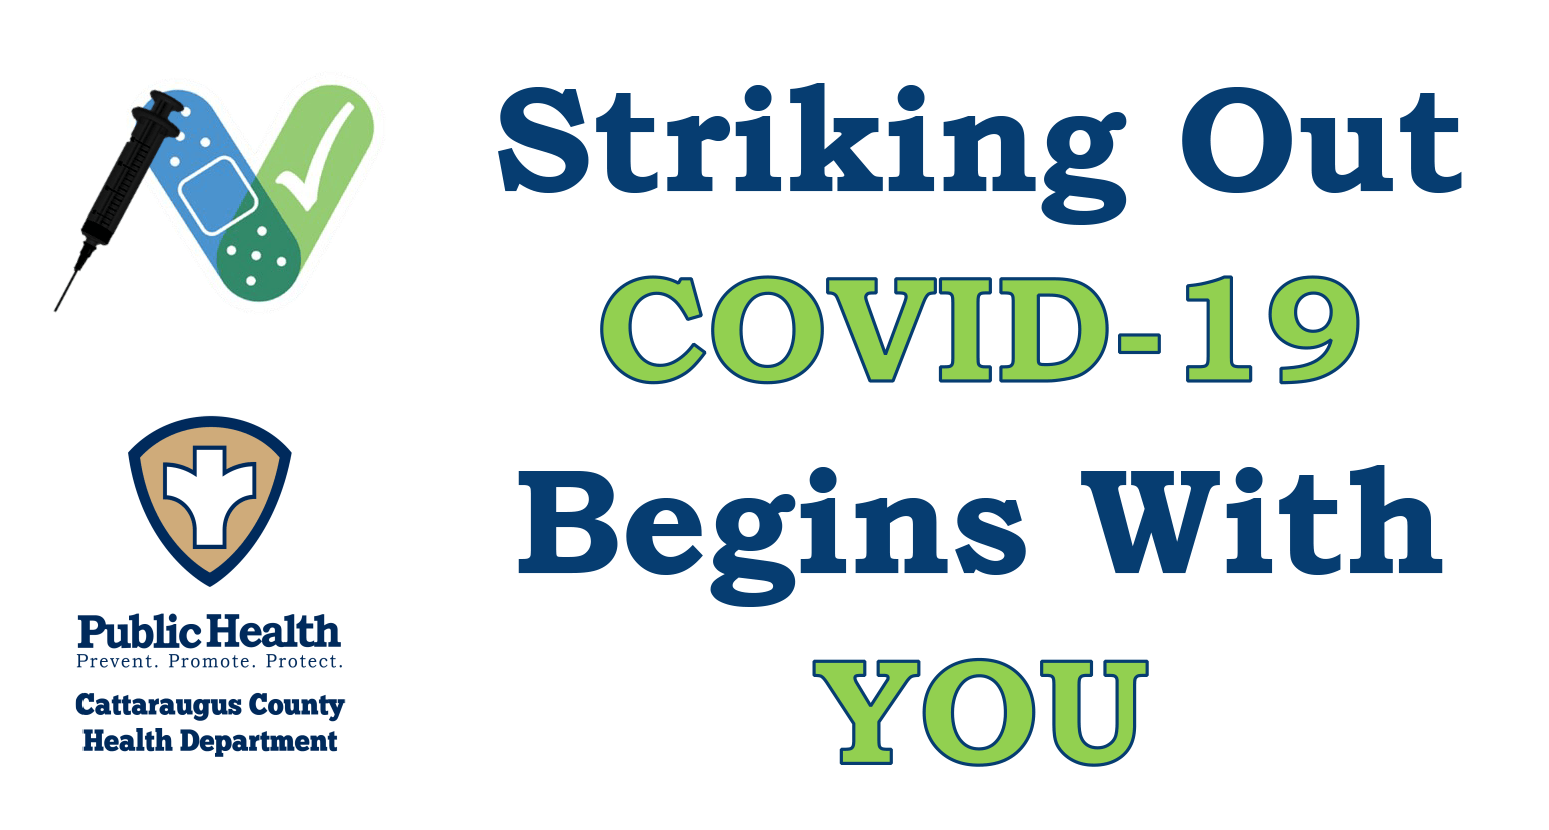 Striking out COVID-19 begins with you! - Public Health Cattaraugus County Health Department